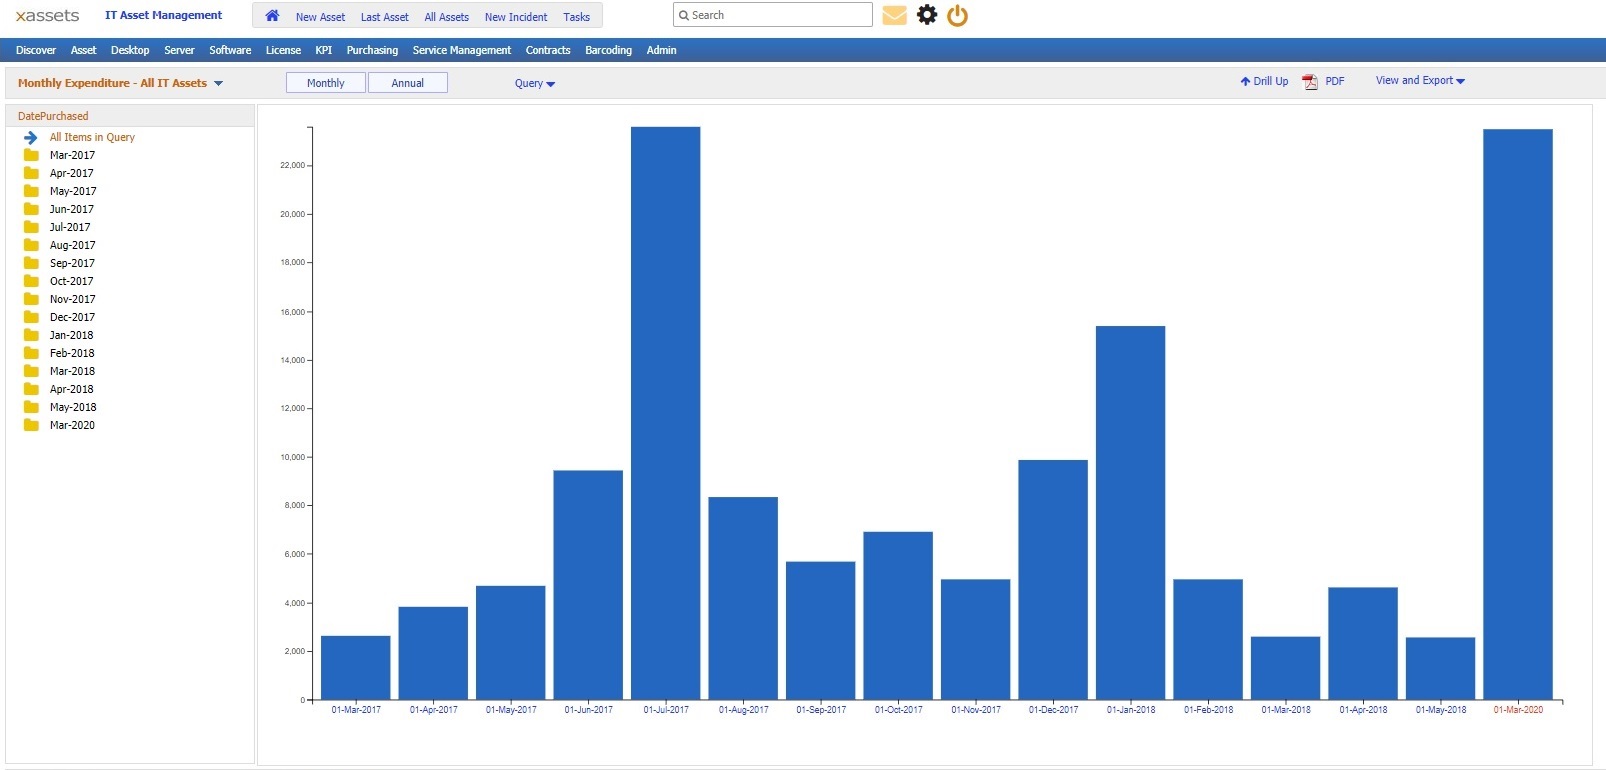 Screenshot of a monthly expenditure report from xAssets IT Asset Management